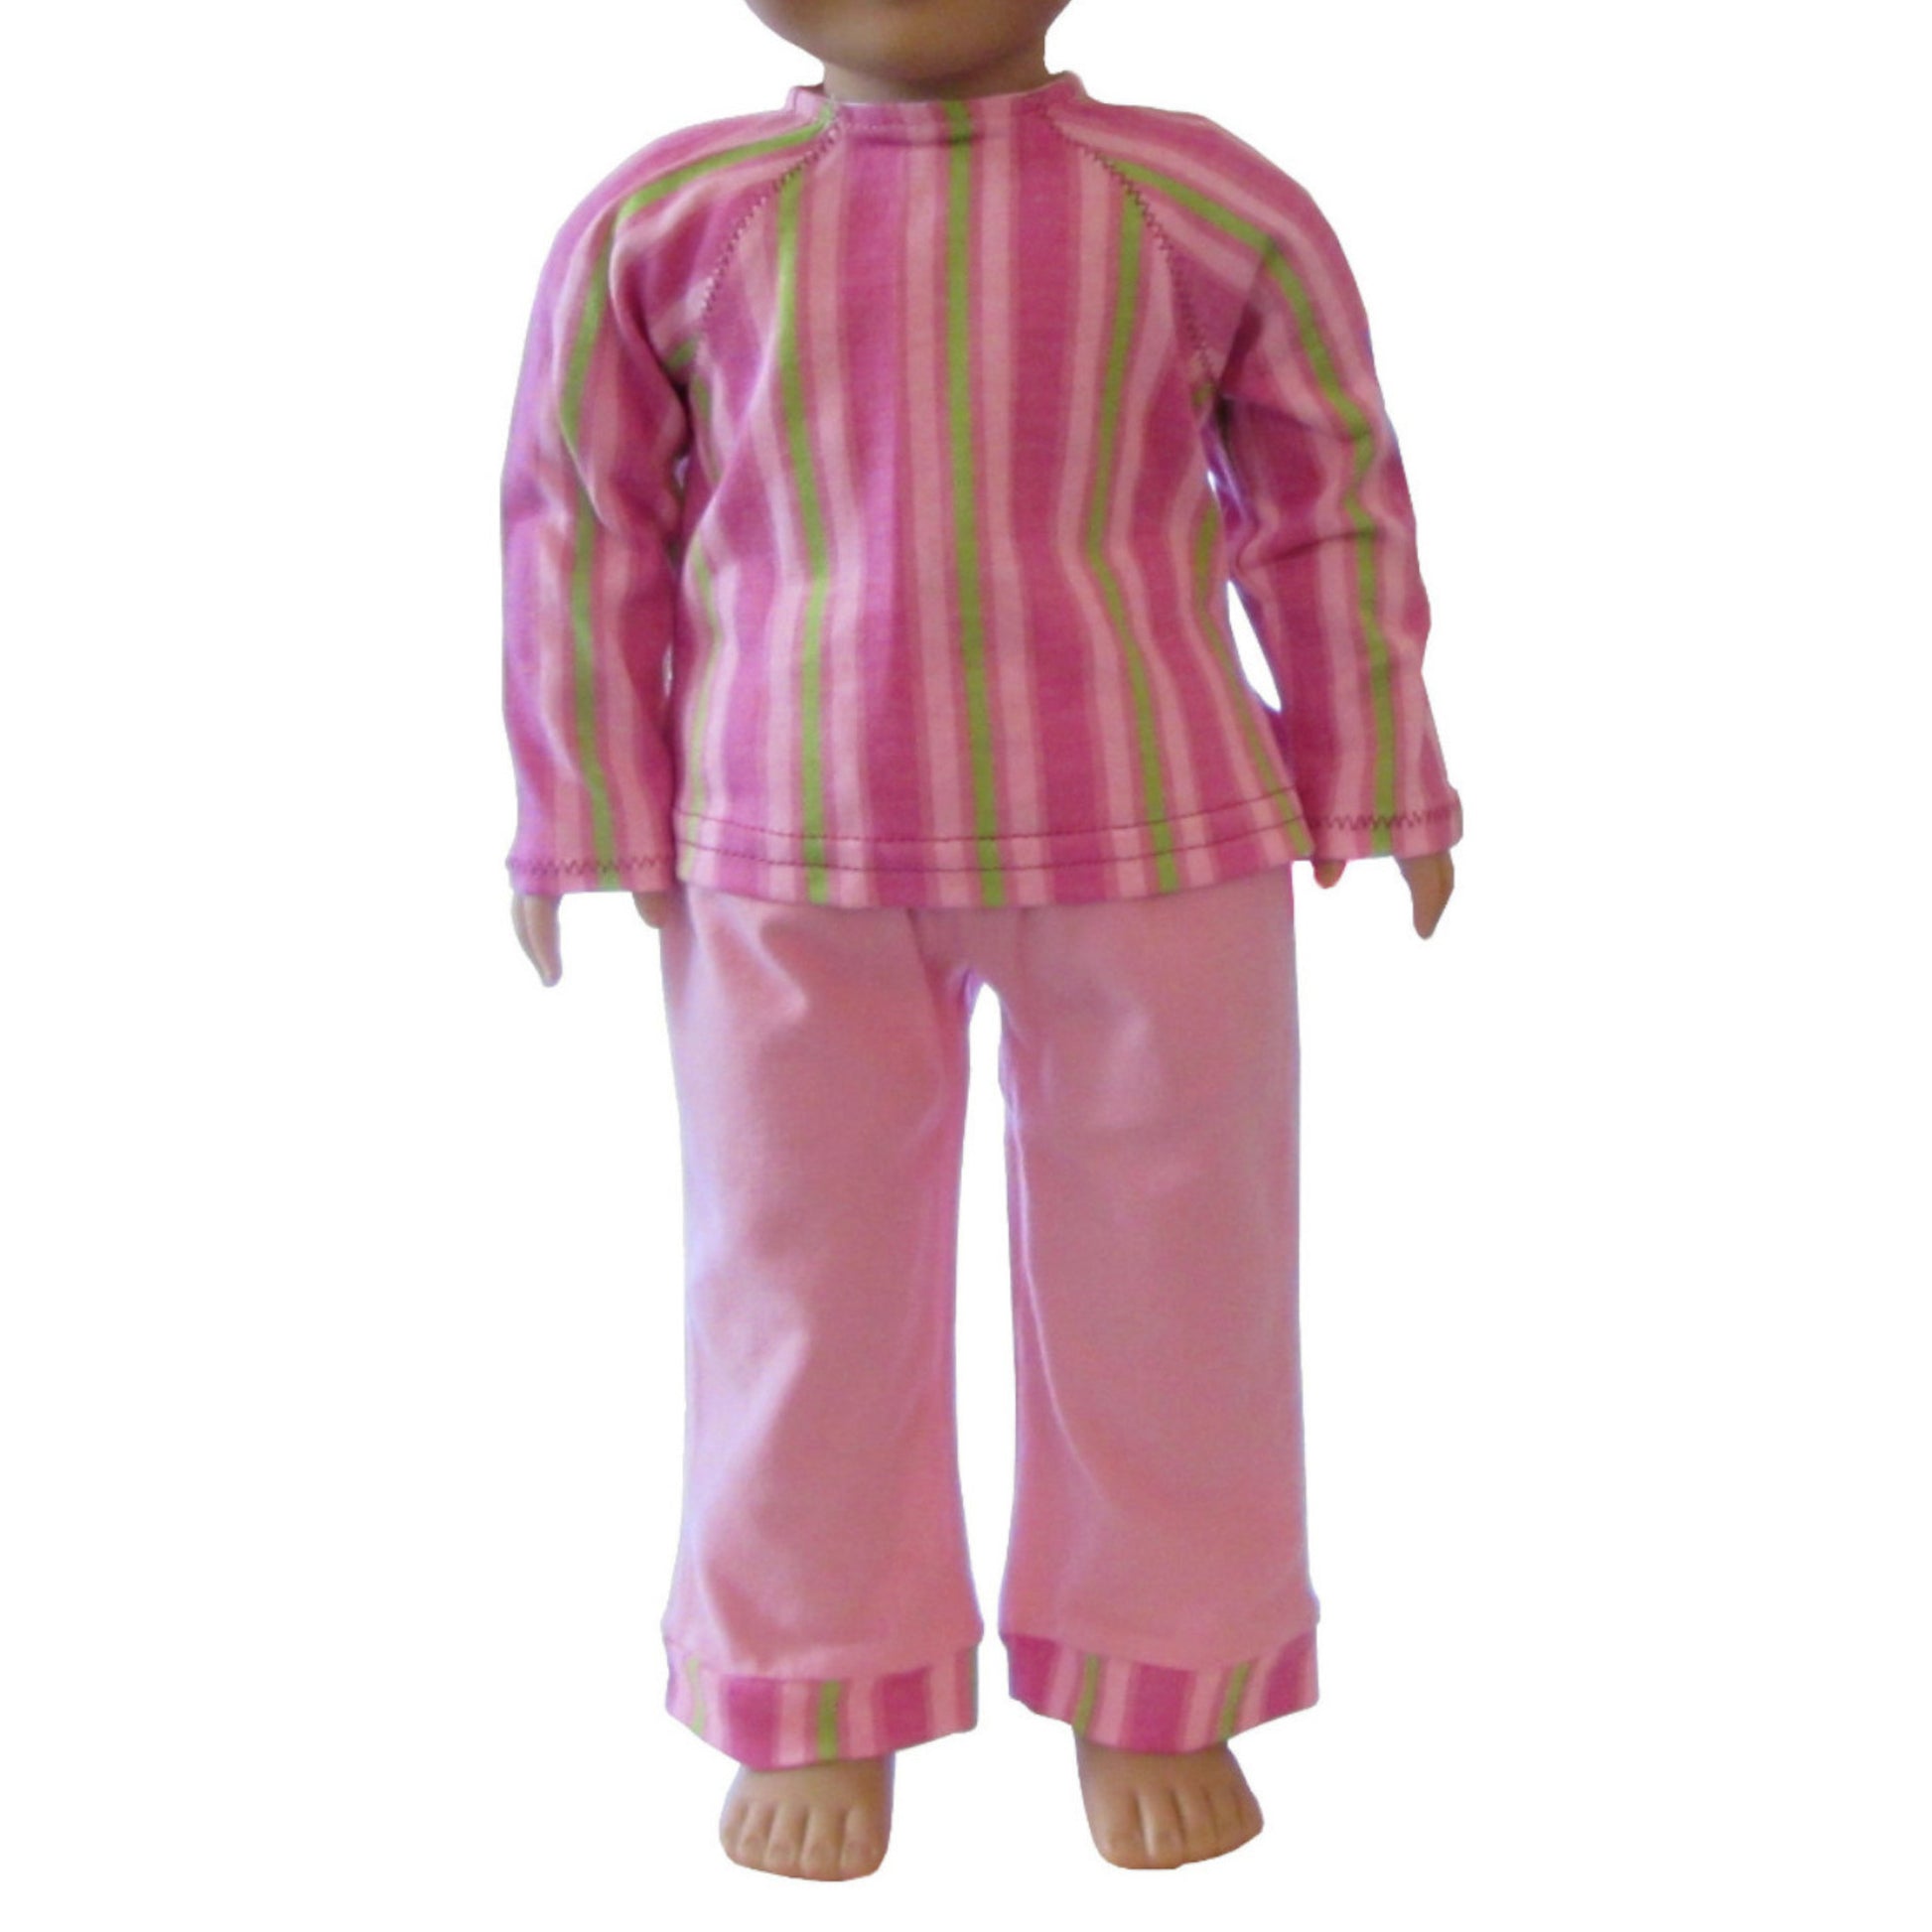 Pink Pastel Striped Top and Pink Pants for 18-inch dolls